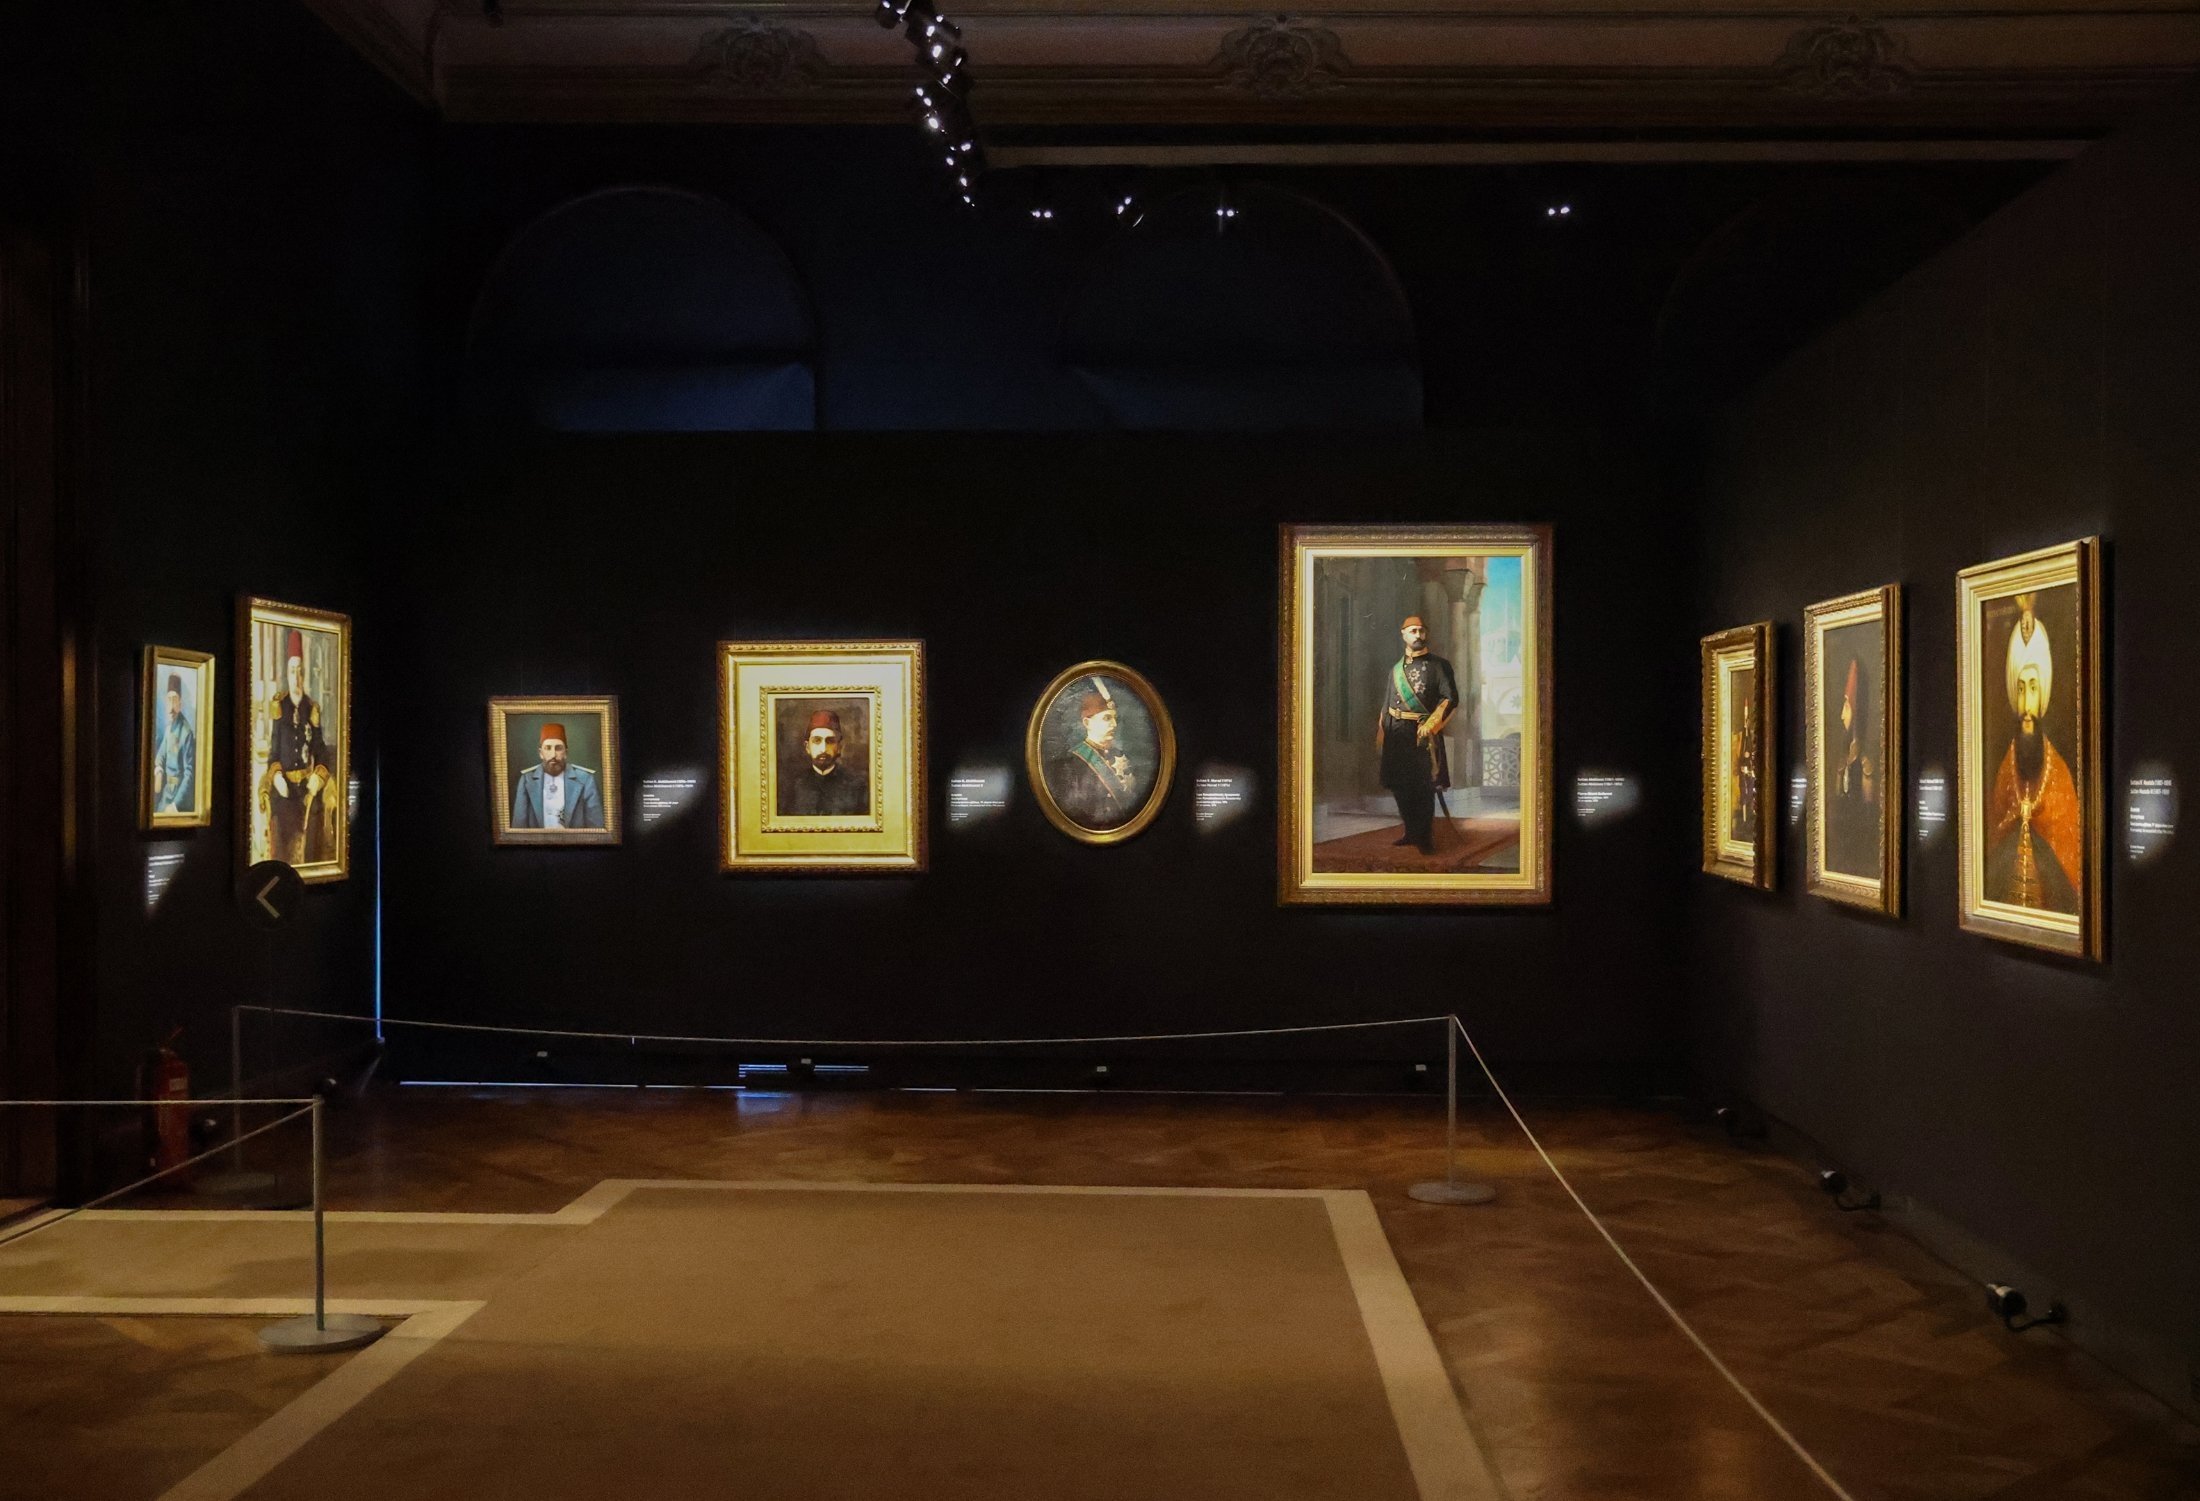 Some paintings on display at the National Palaces Painting Museum at Dolmabahçe Palace